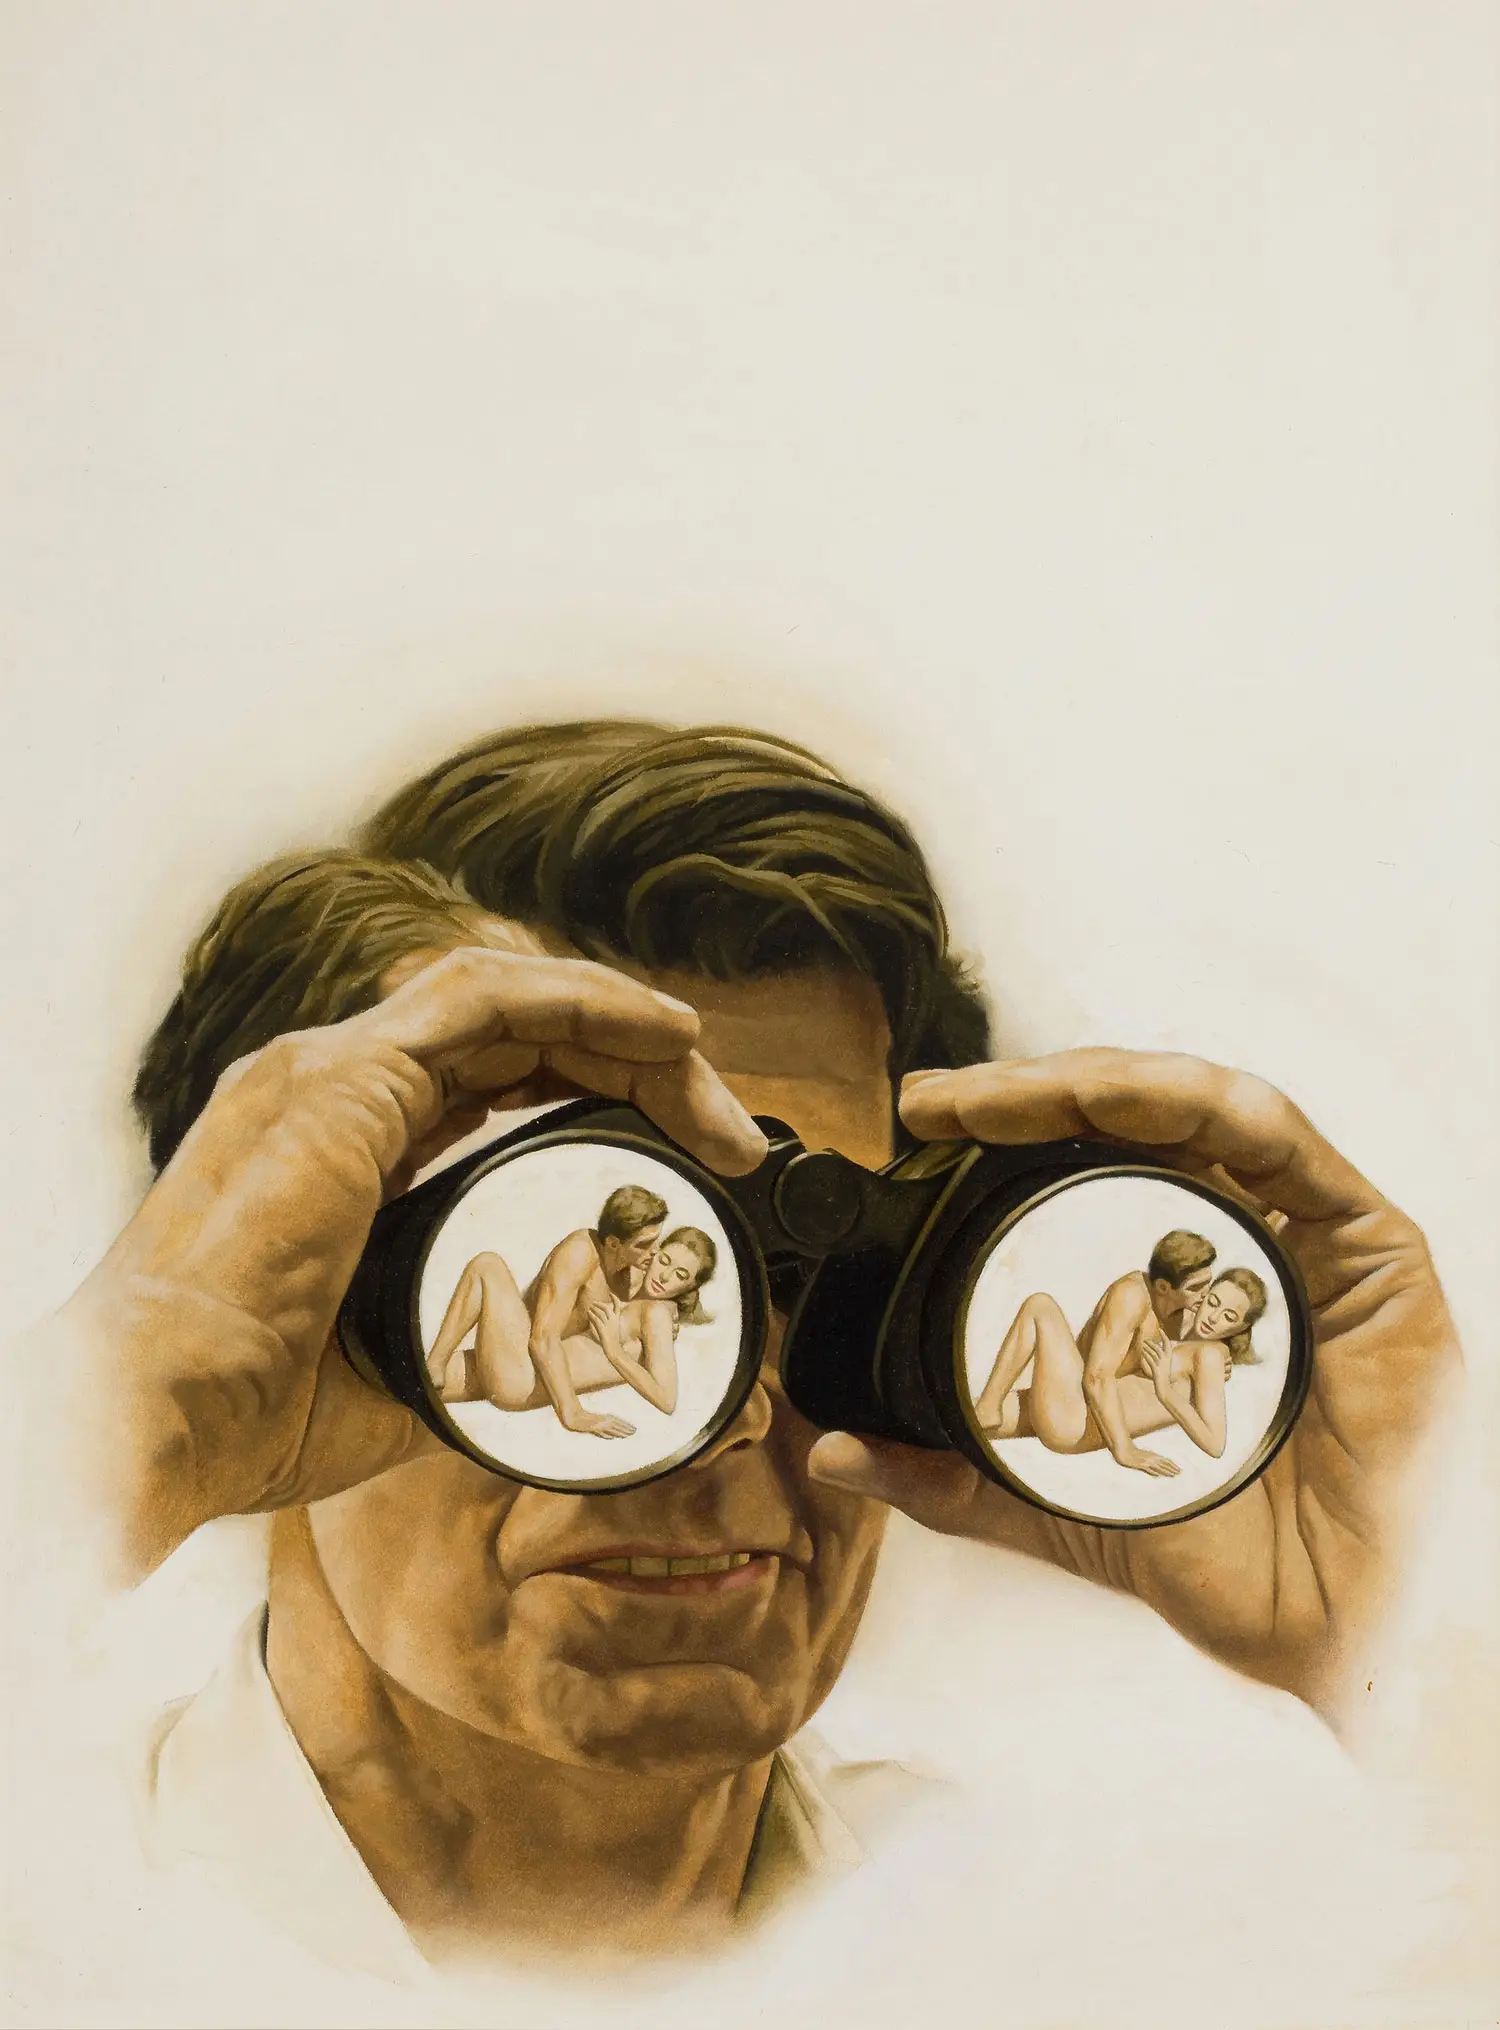 A man appears to be looking through binoculars at a heterosexual couple making love.